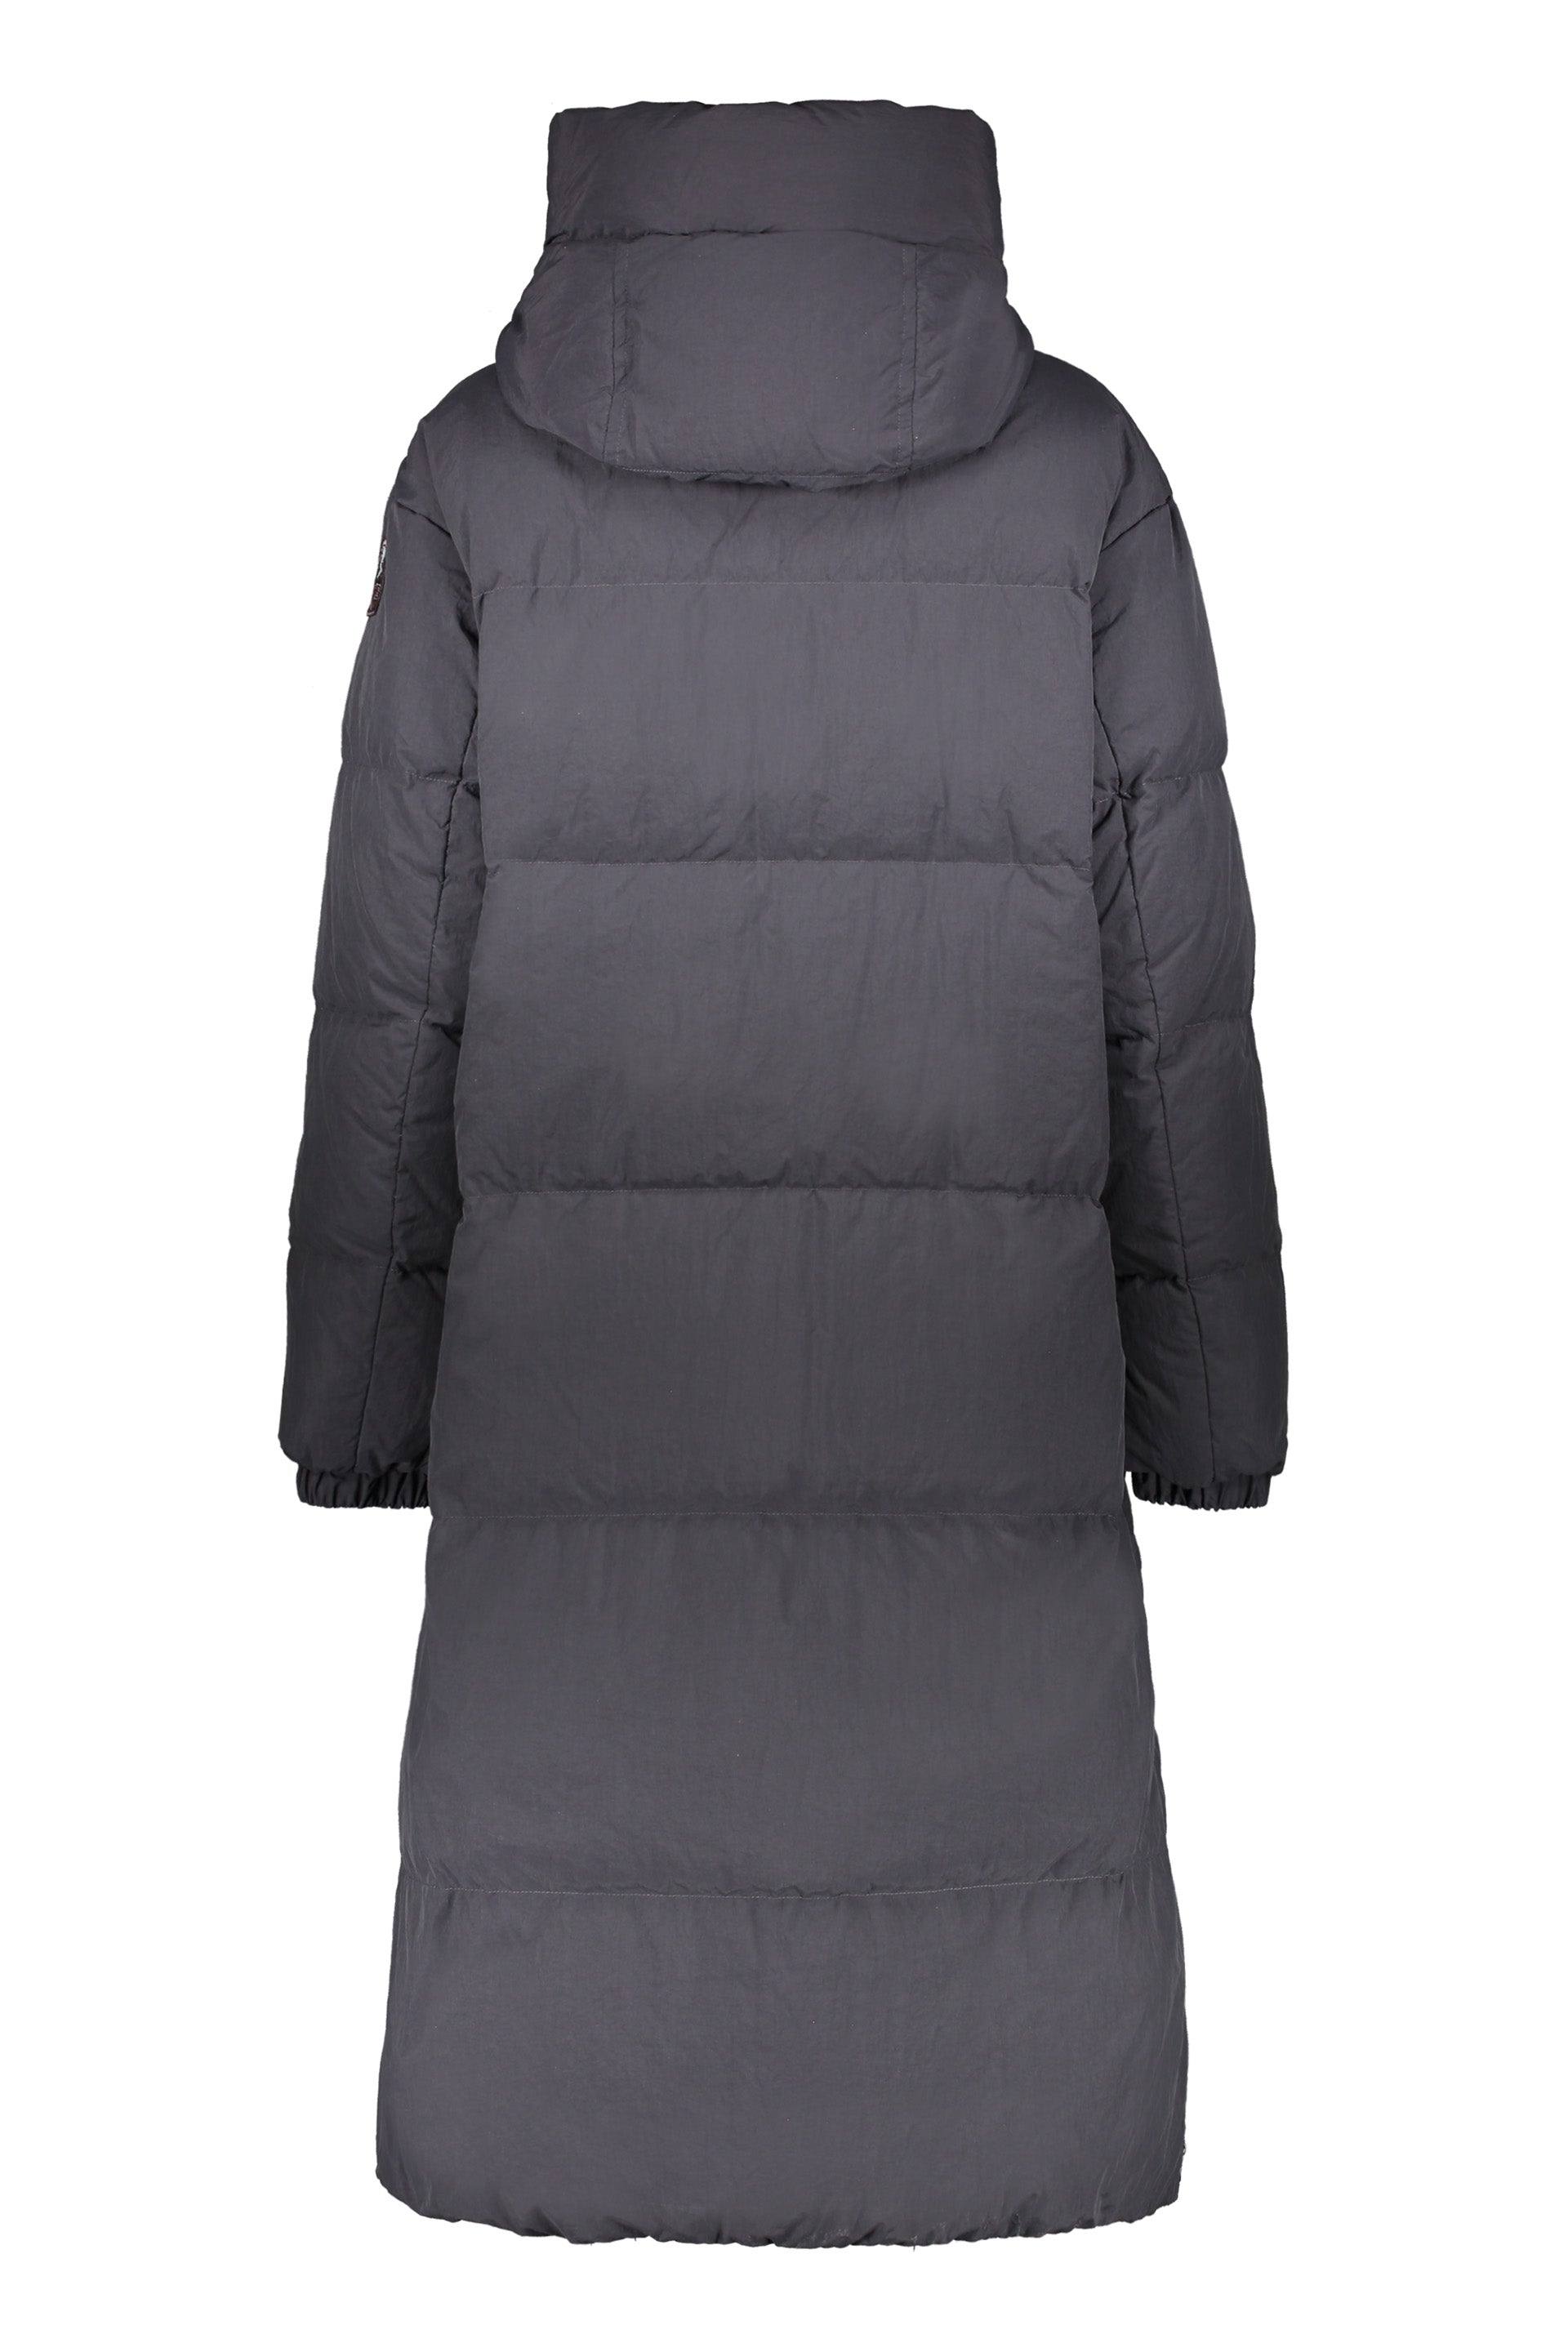 Parajumpers-OUTLET-SALE-Sleeping-Bag-long-hooded-down-jacket-Jacken-Mantel-ARCHIVE-COLLECTION-2.jpg